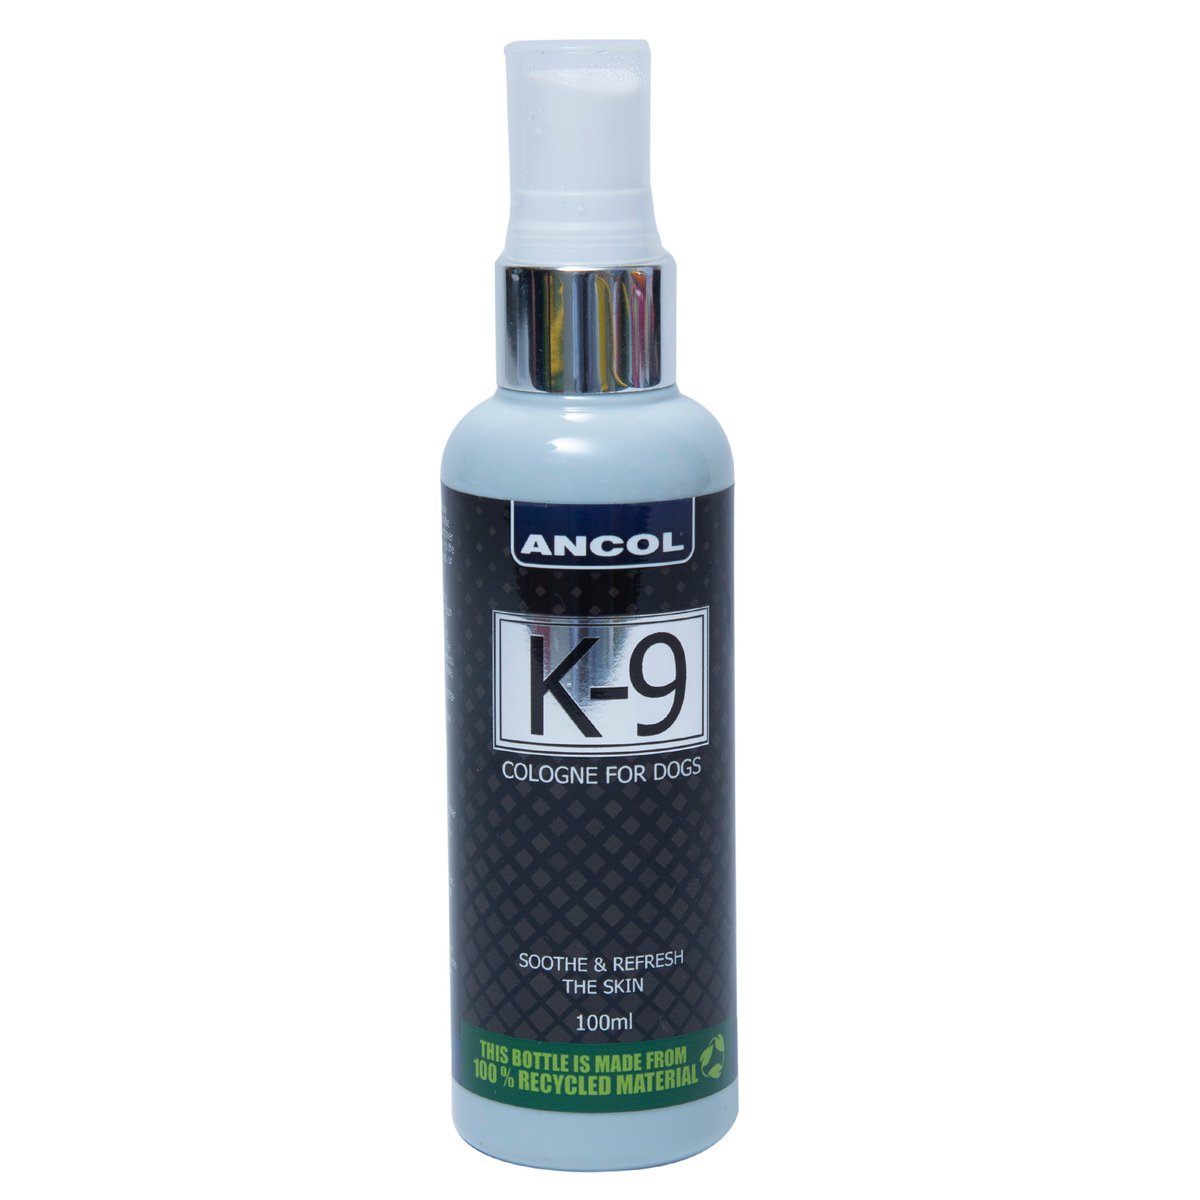 Ancol K-9 Cologne For Dogs 100ml